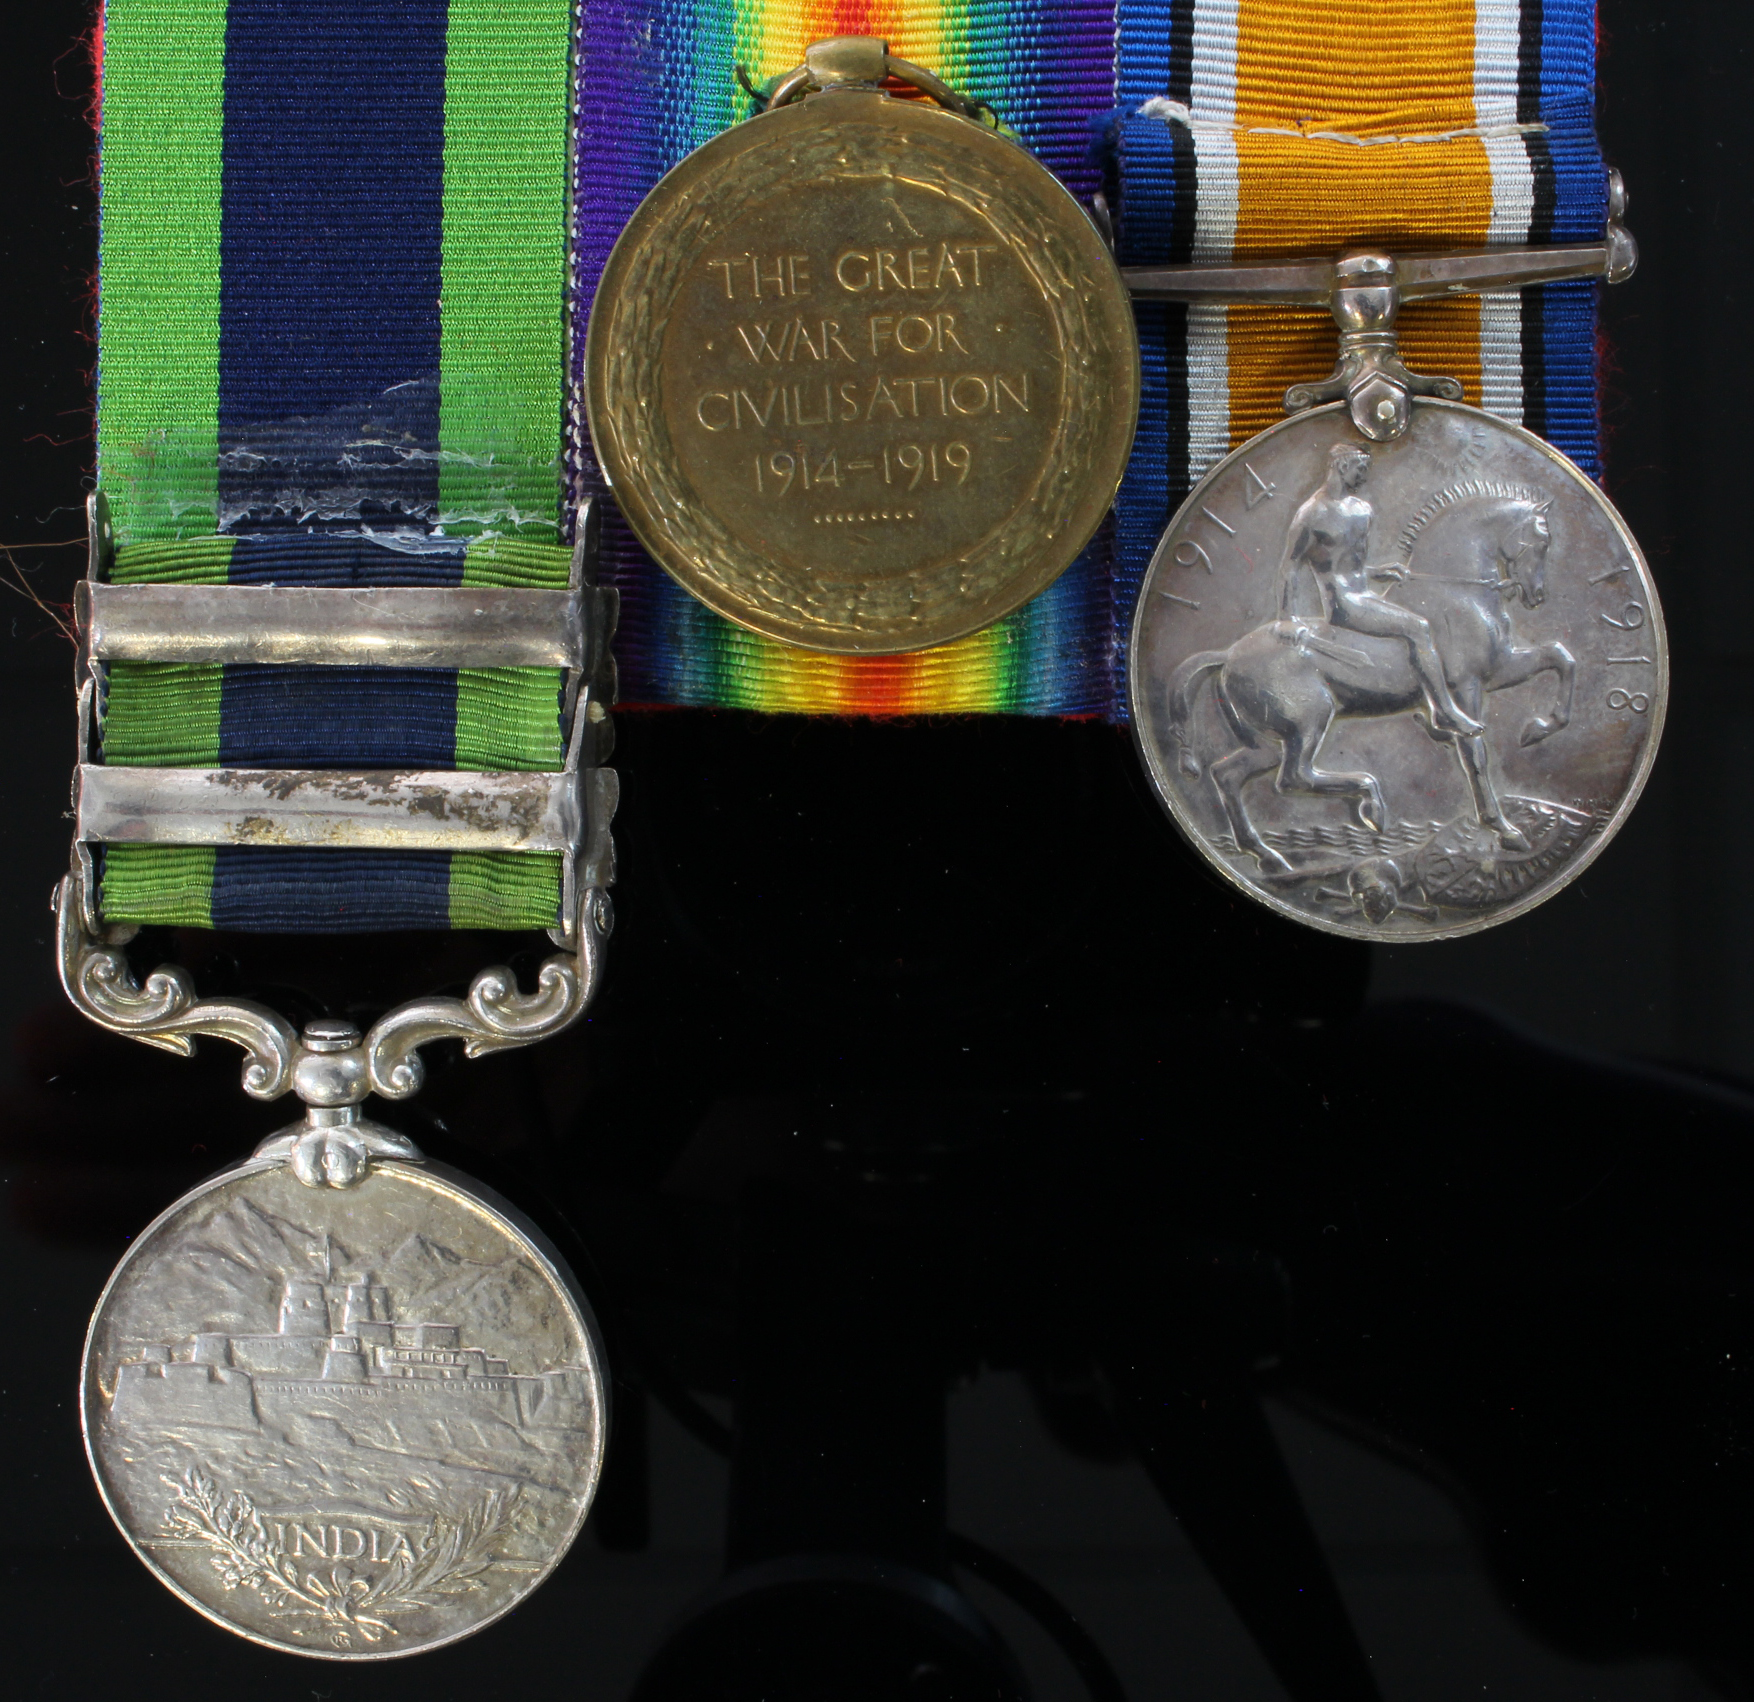 BWM & Victory Medal (5245 Pte H Webb Midd'x R), and IGS GV with bars Waziristan 1919-21 and - Image 2 of 2